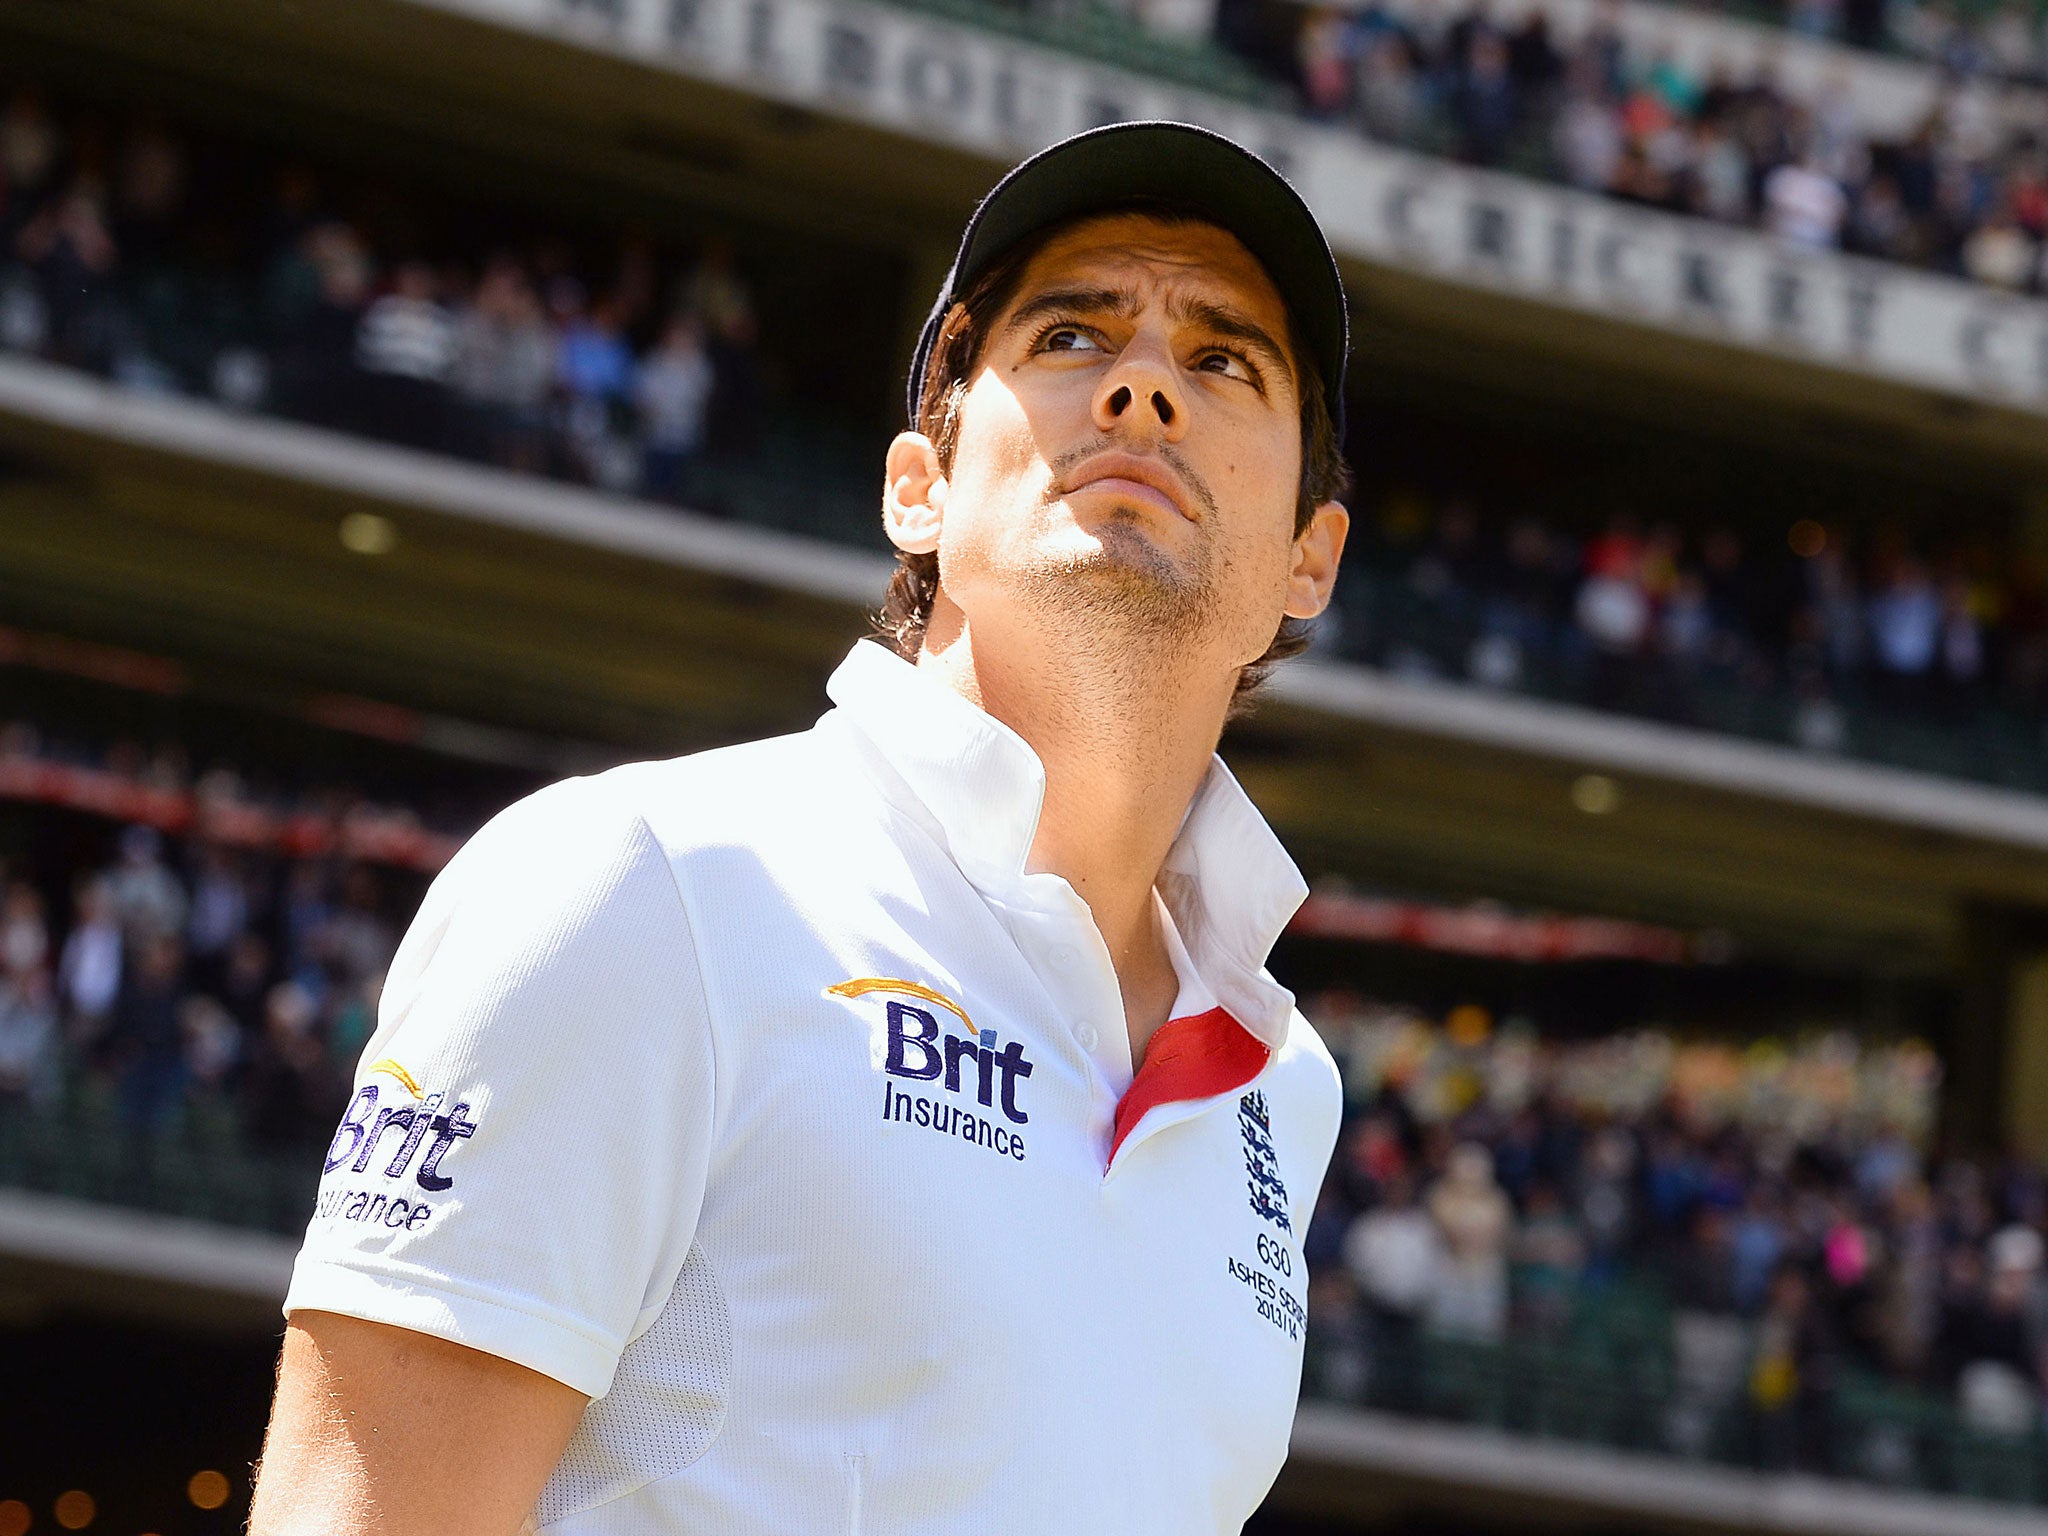 Alastair Cook's England could be whitewashed by Australia in the Ashes series